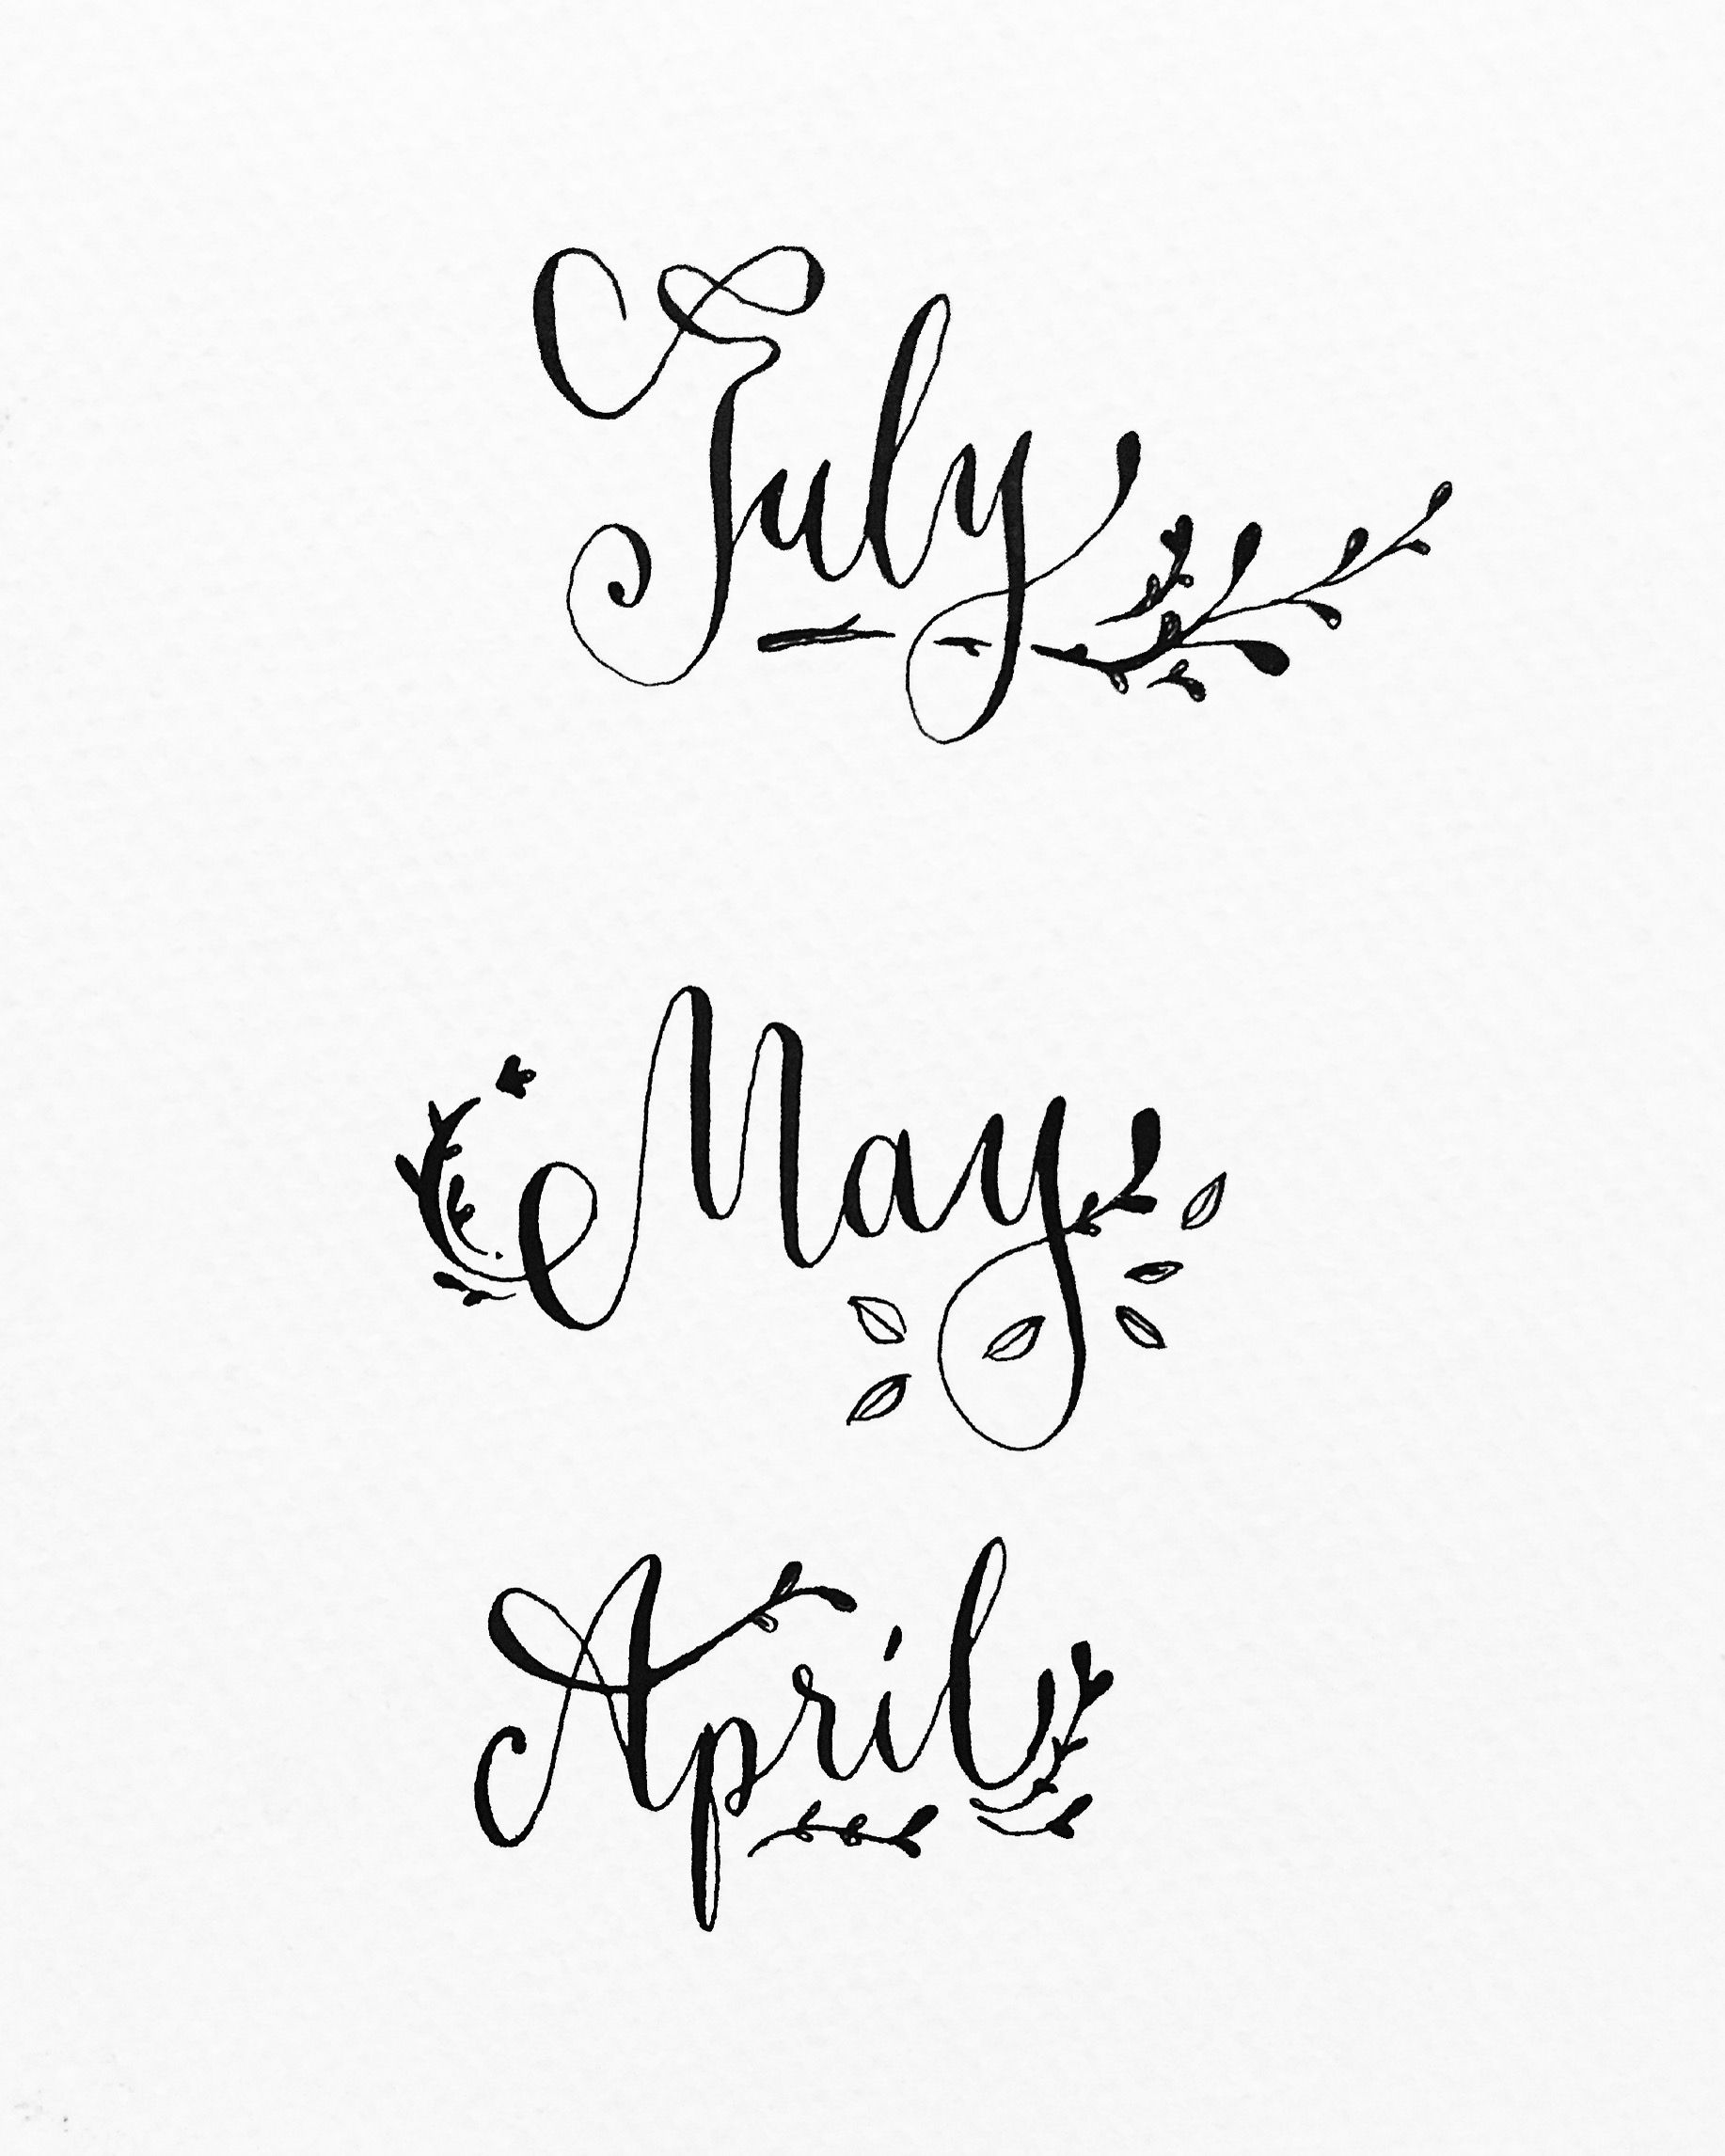 month #july #may #april #calligraphy #typography.